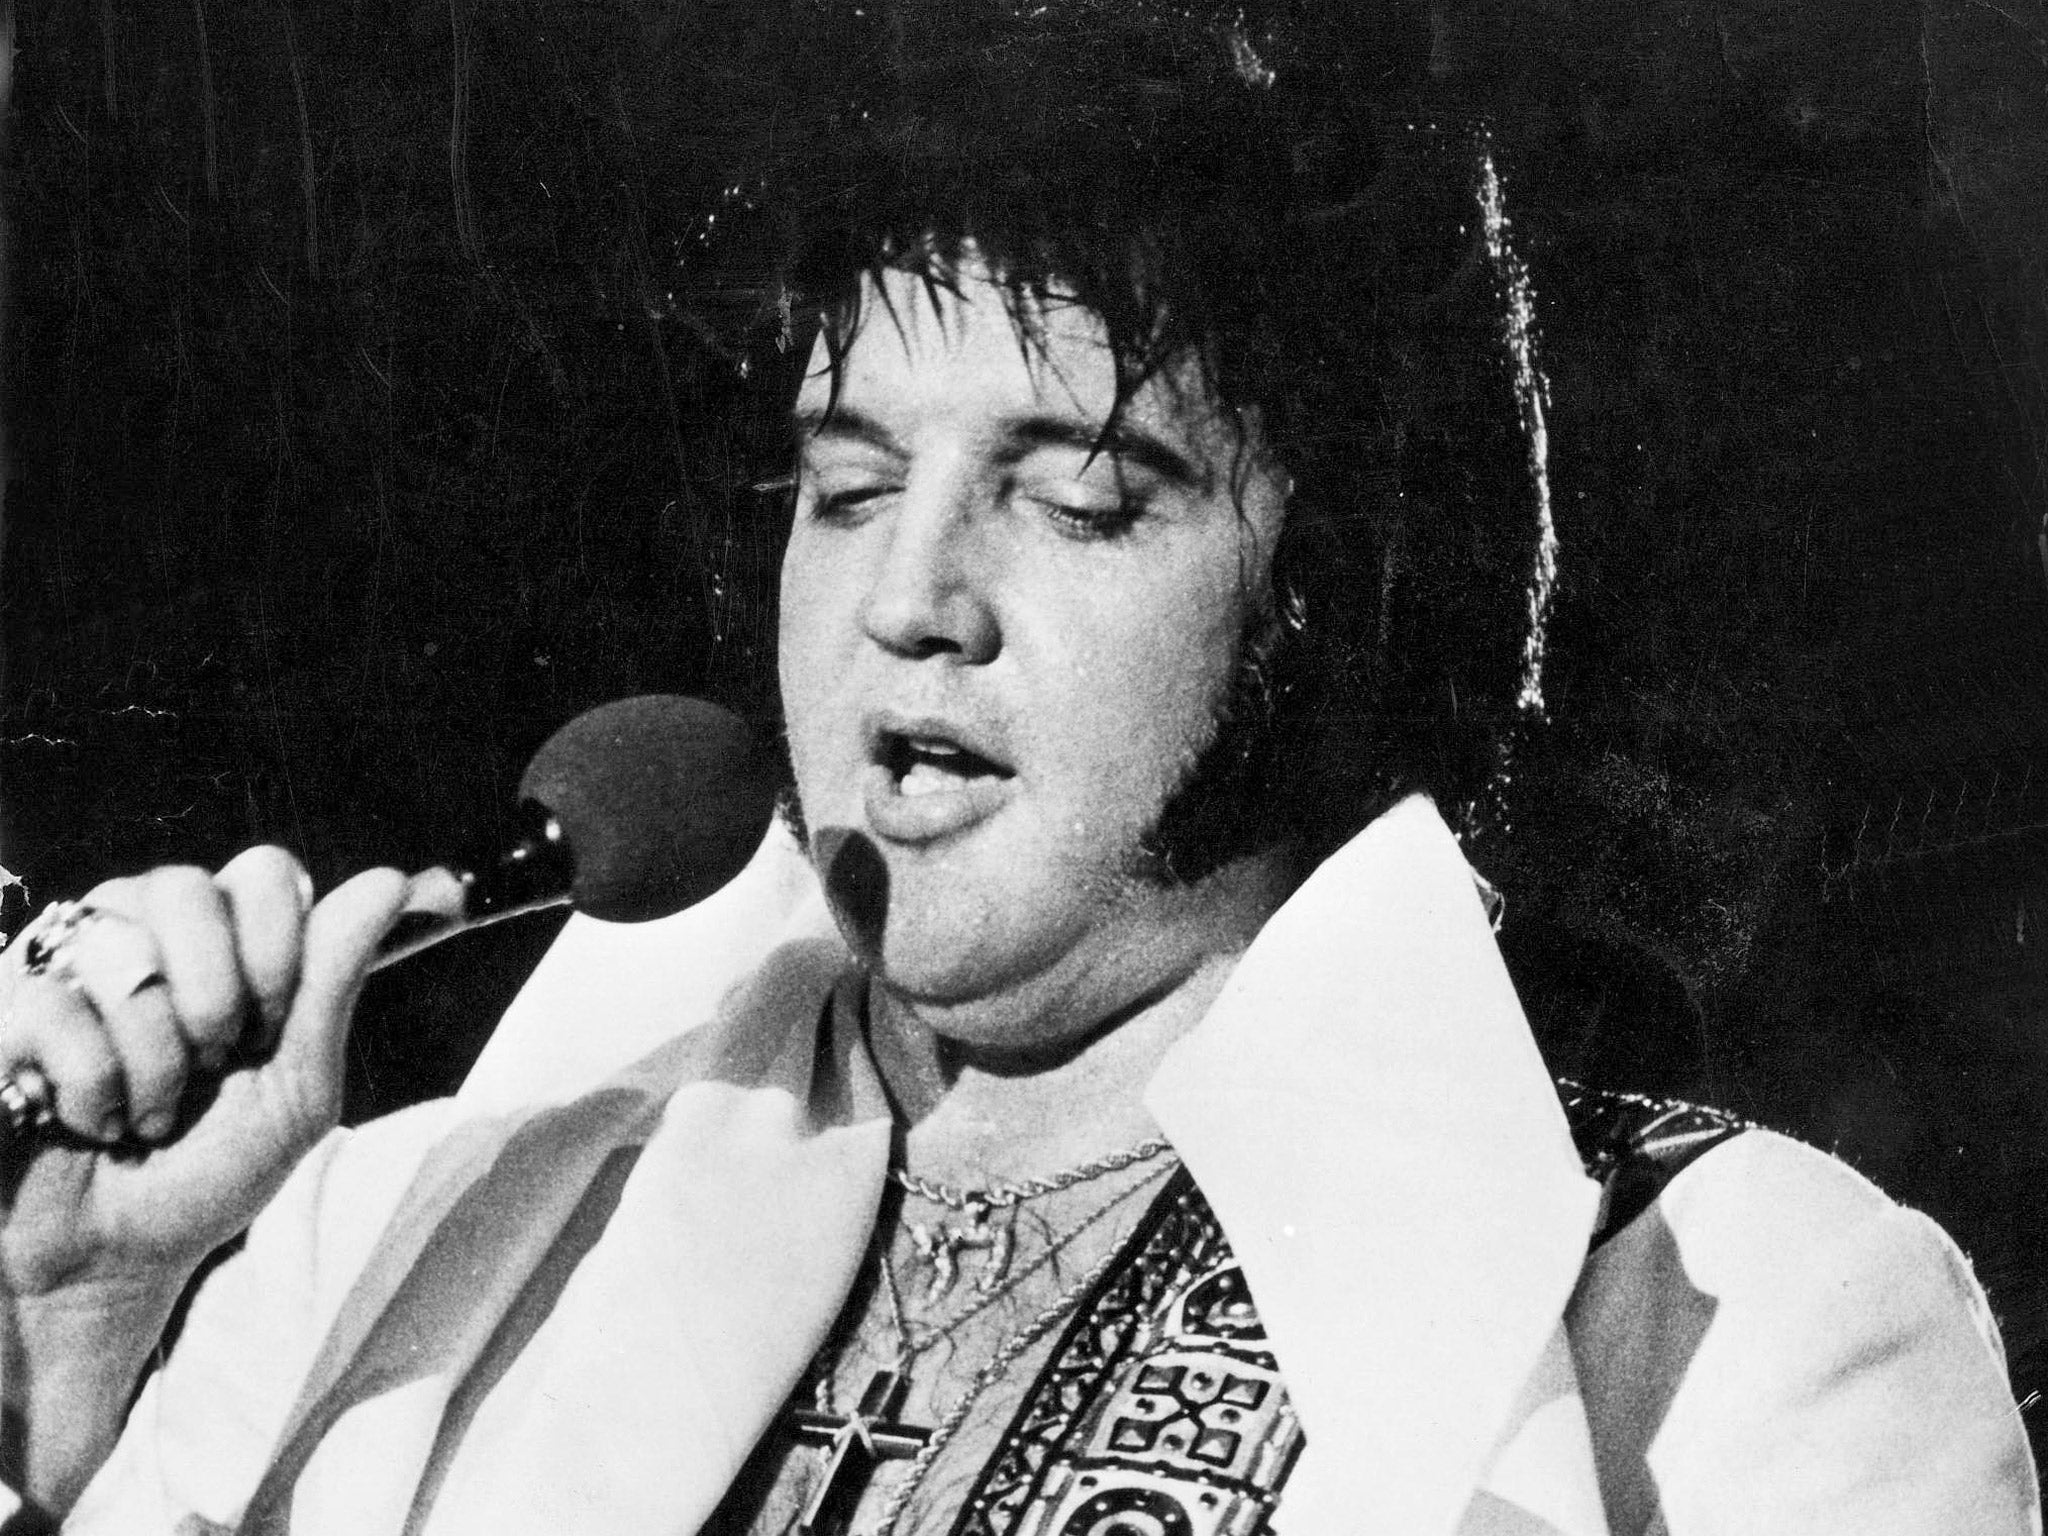 Elvis Presley at one of his final concerts in 1977